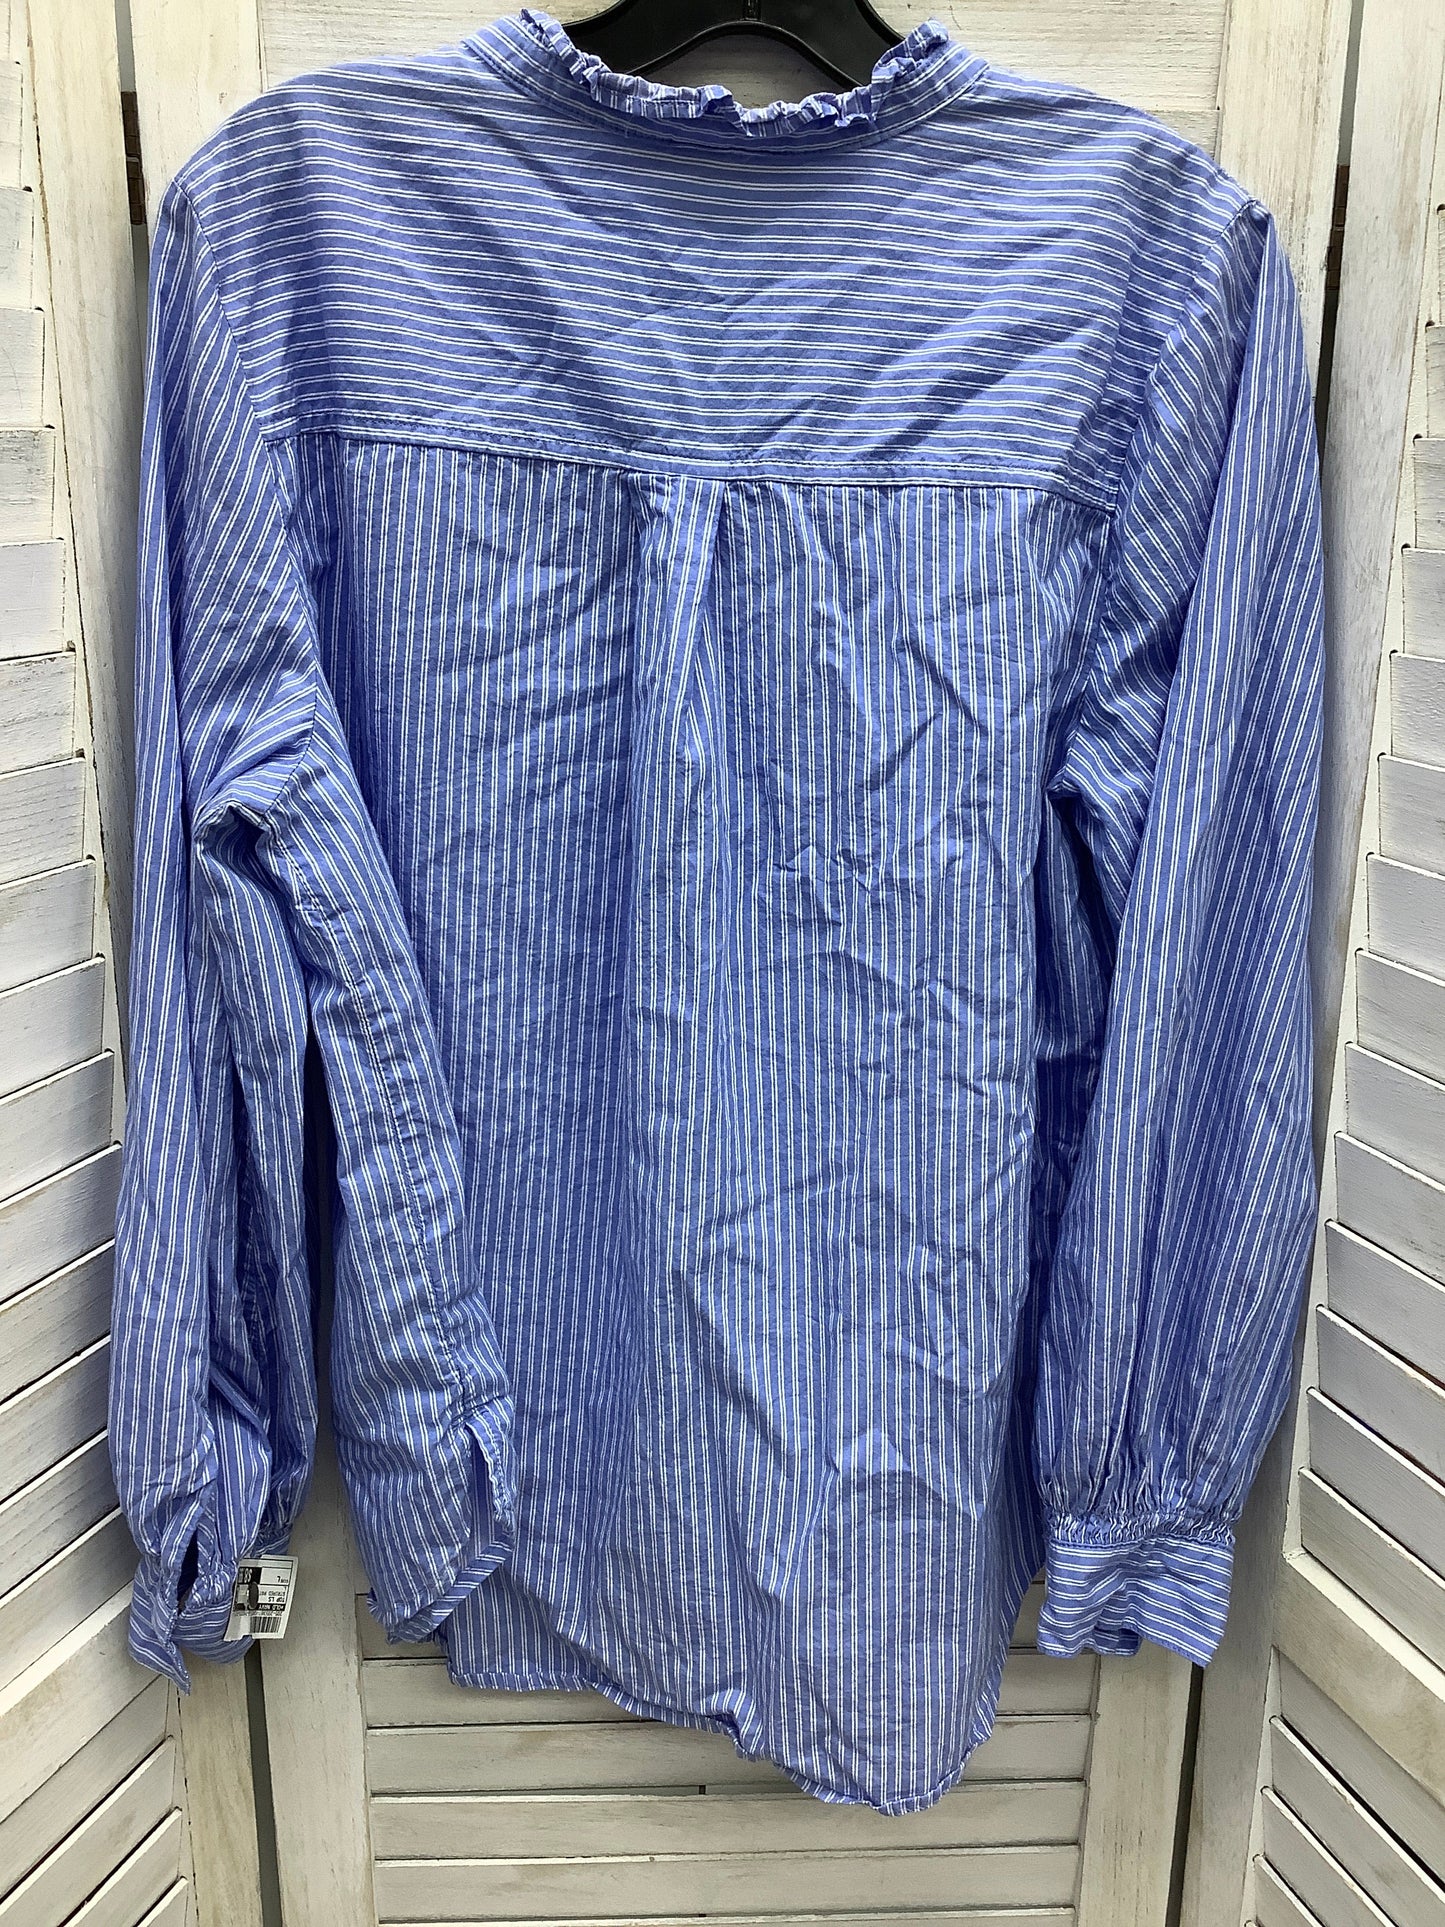 Striped Pattern Top Long Sleeve Old Navy, Size L